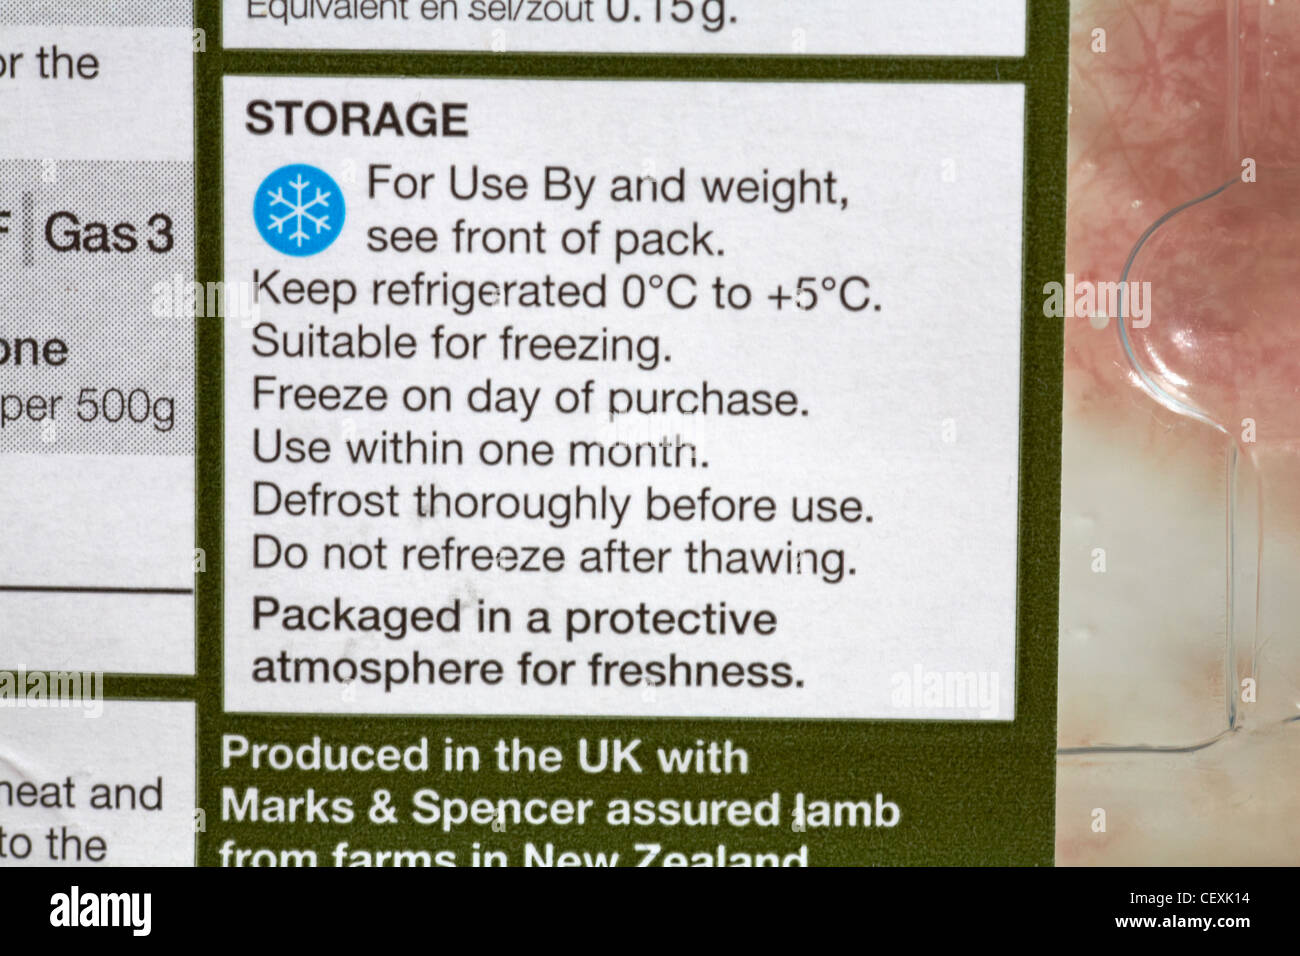 Storage instructions on back of Marks & Spencer assured lamb from farms in New Zealand Stock Photo